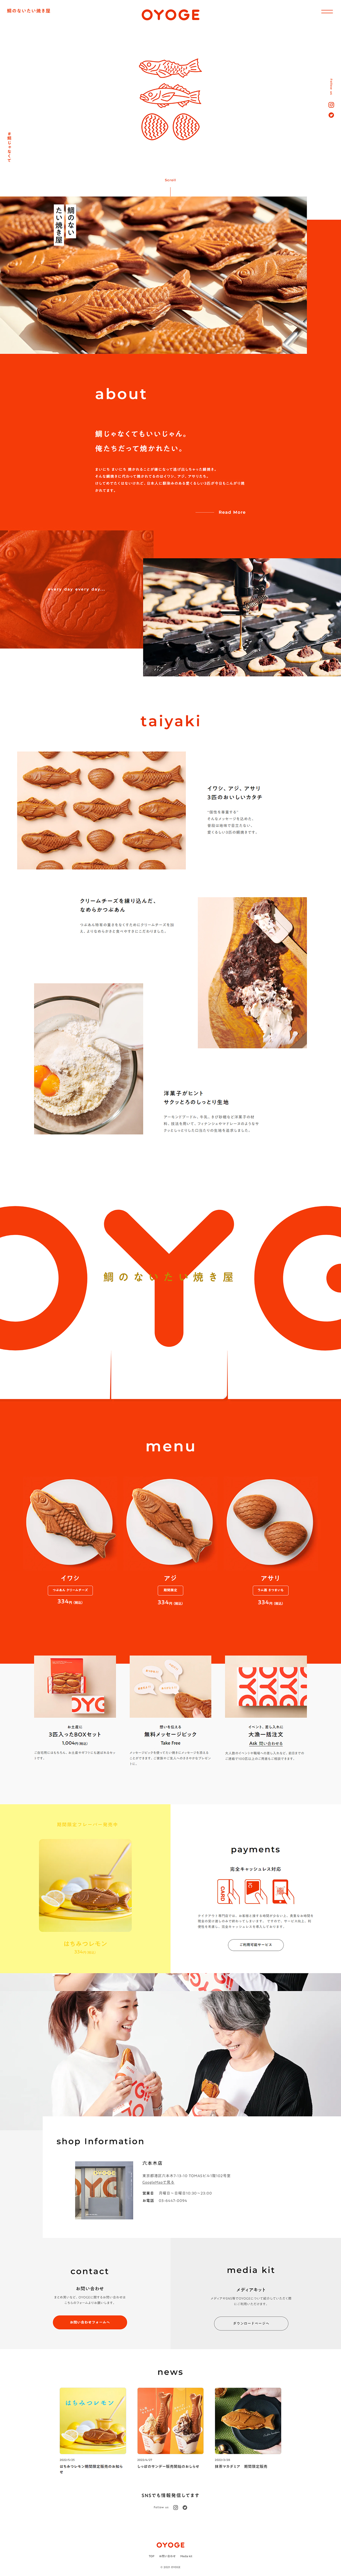 OYOGE_pc_1